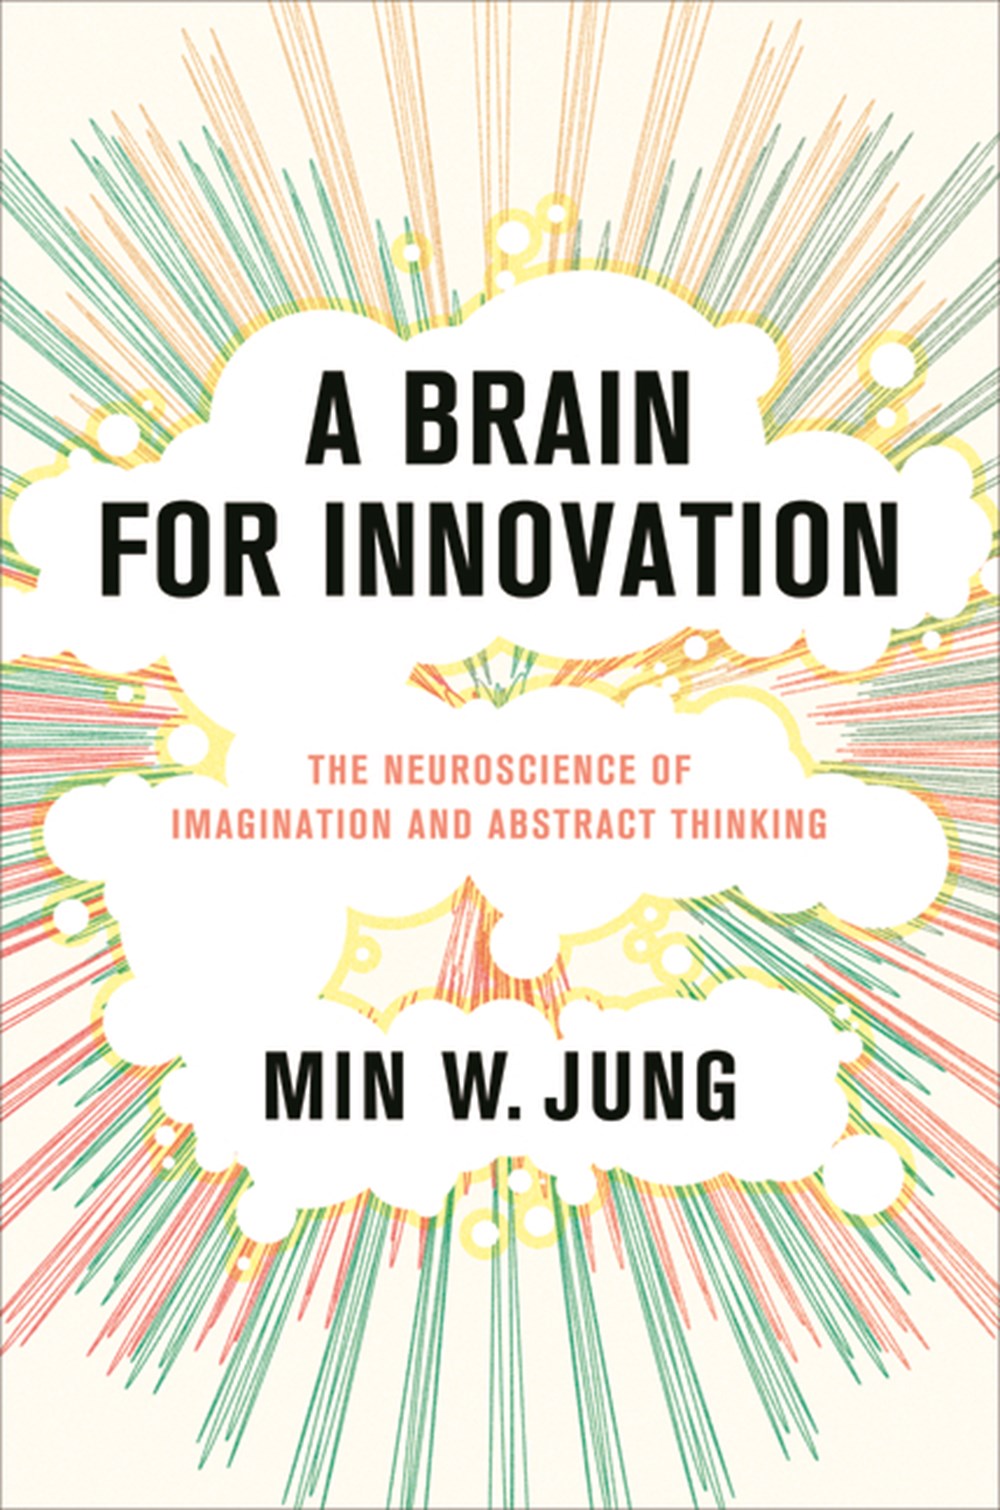 Brain for Innovation: The Neuroscience of Imagination and Abstract Thinking